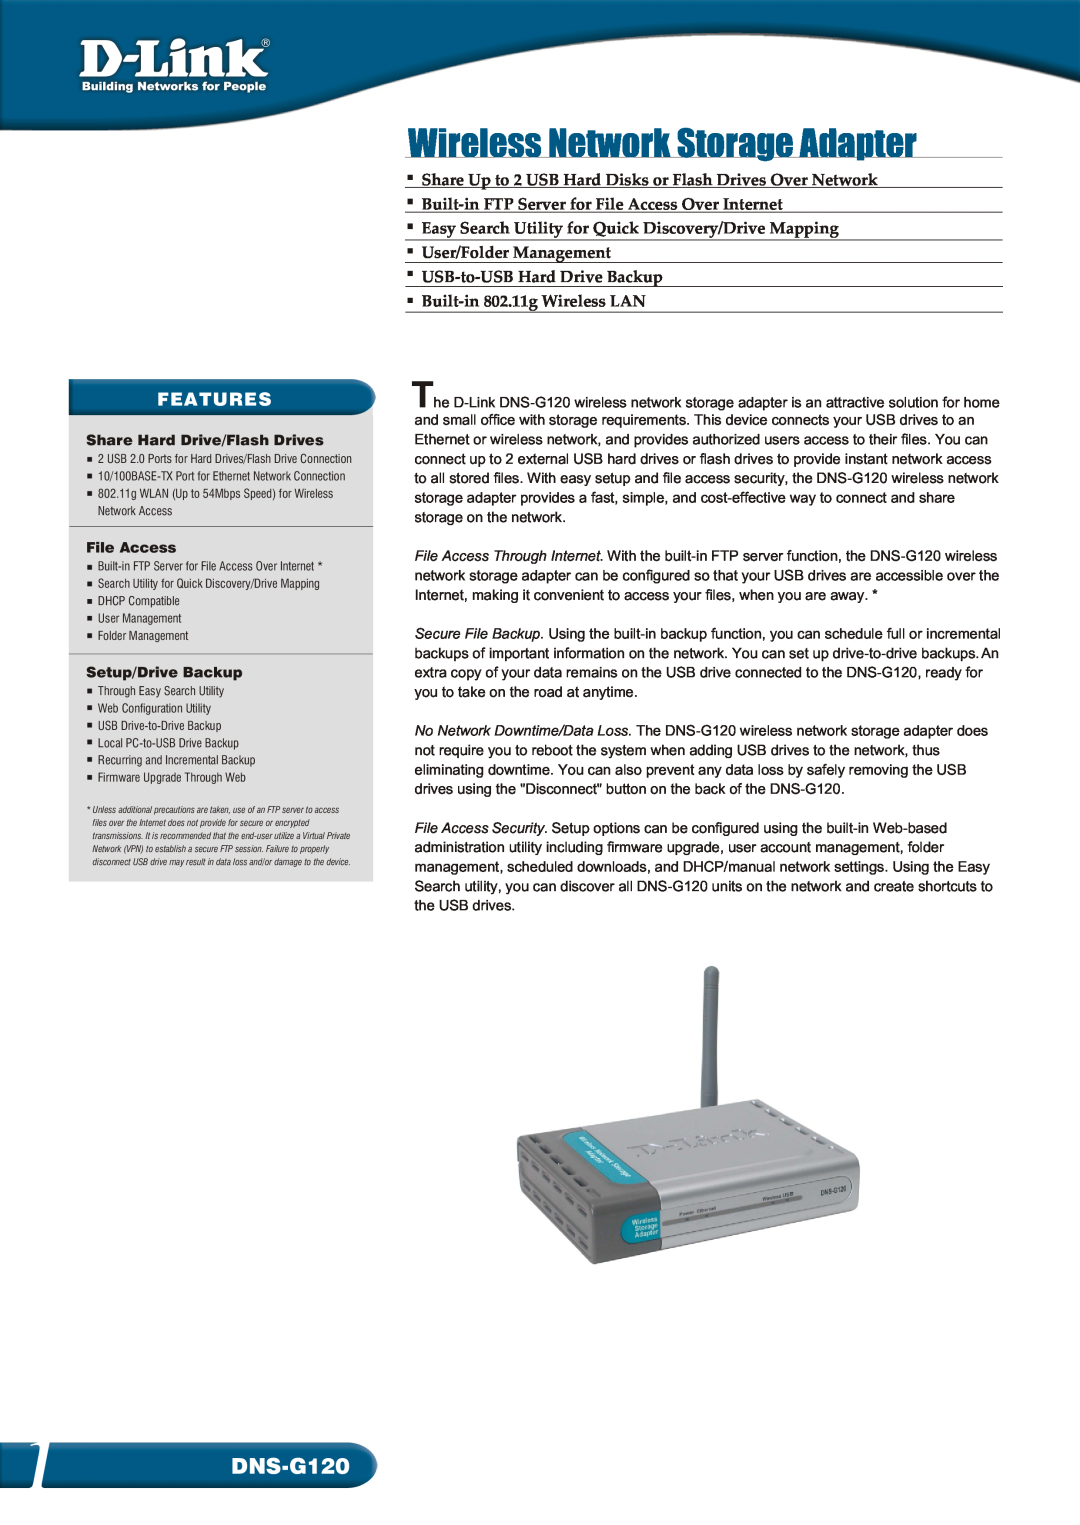 D-Link DNS-G120 manual Wireless Network Storage Adapter, Features, Built-in FTP Server for File Access Over Internet 